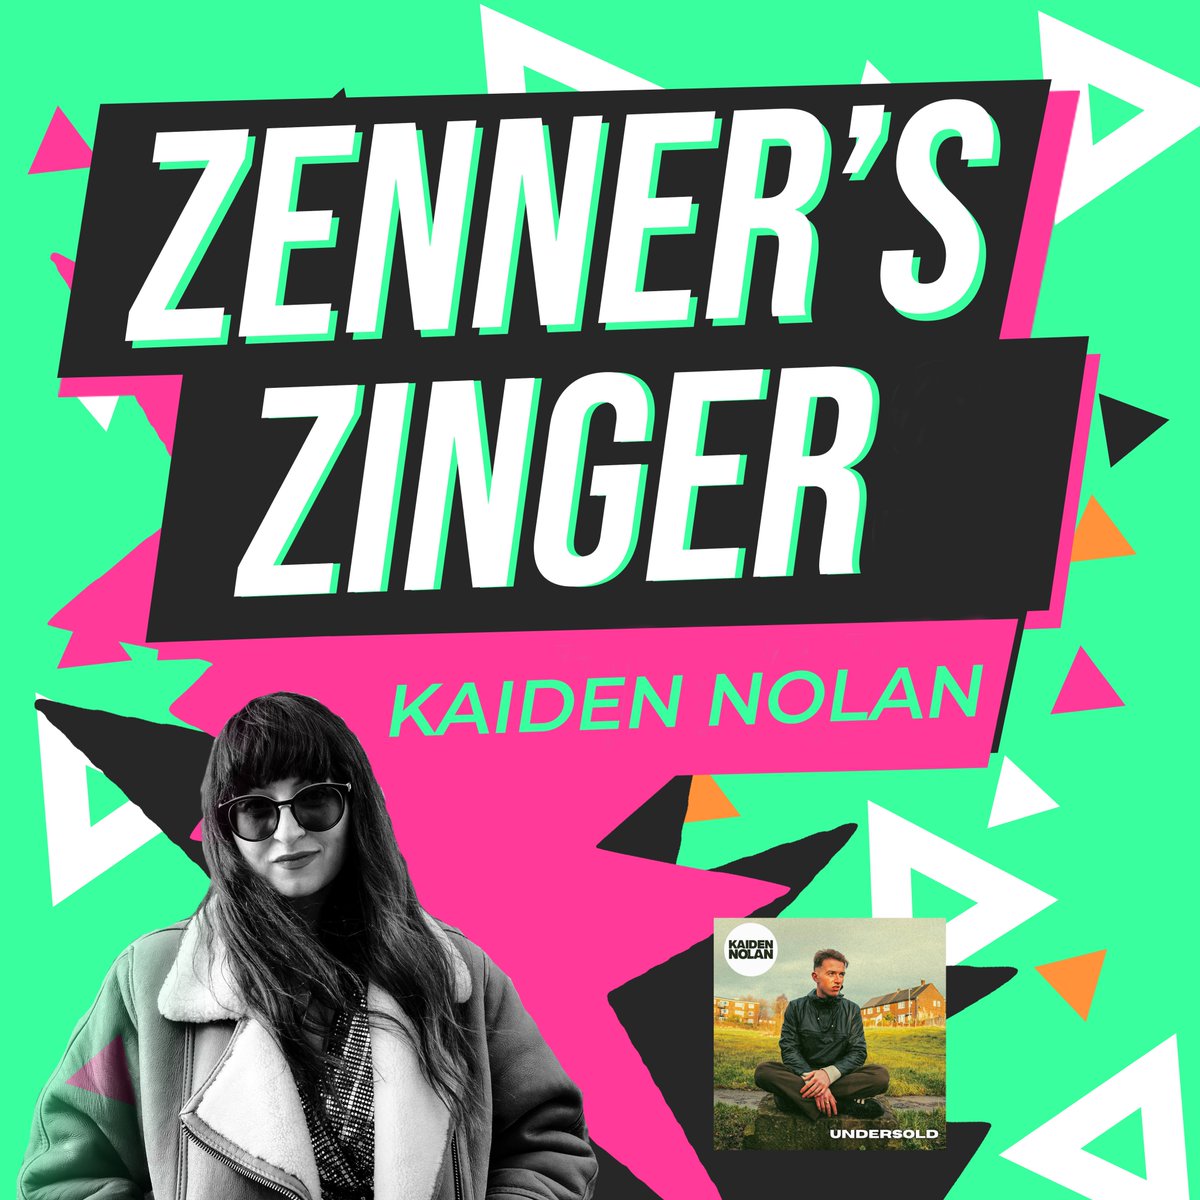 My #zennerszinger this weekend on @XSManchester is from @KaidenNolan 'Undersold' is an absolute cracker! I'll be playing it again tomorrow 9.30am ish!